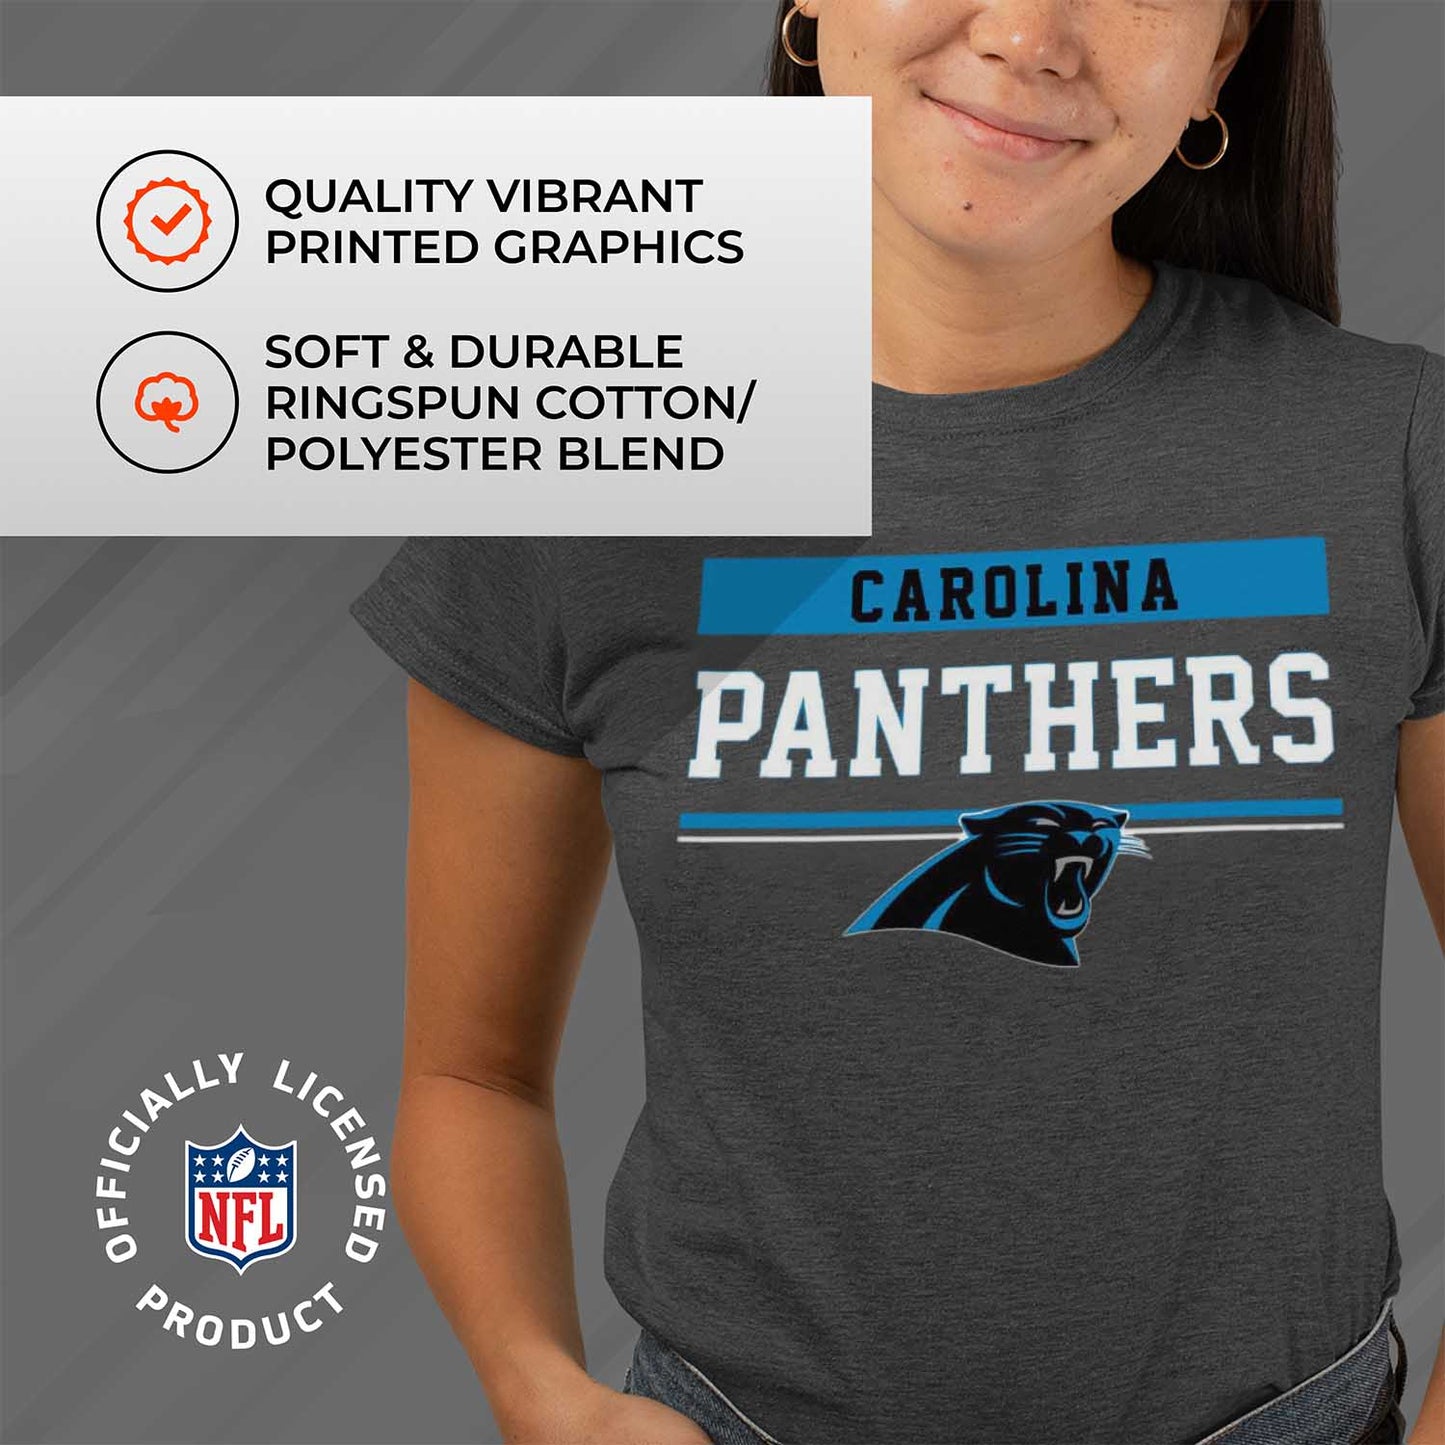 Carolina Panthers NFL Women's Team Block Plus Sized Relaxed Fit T-Shirt - Charcoal